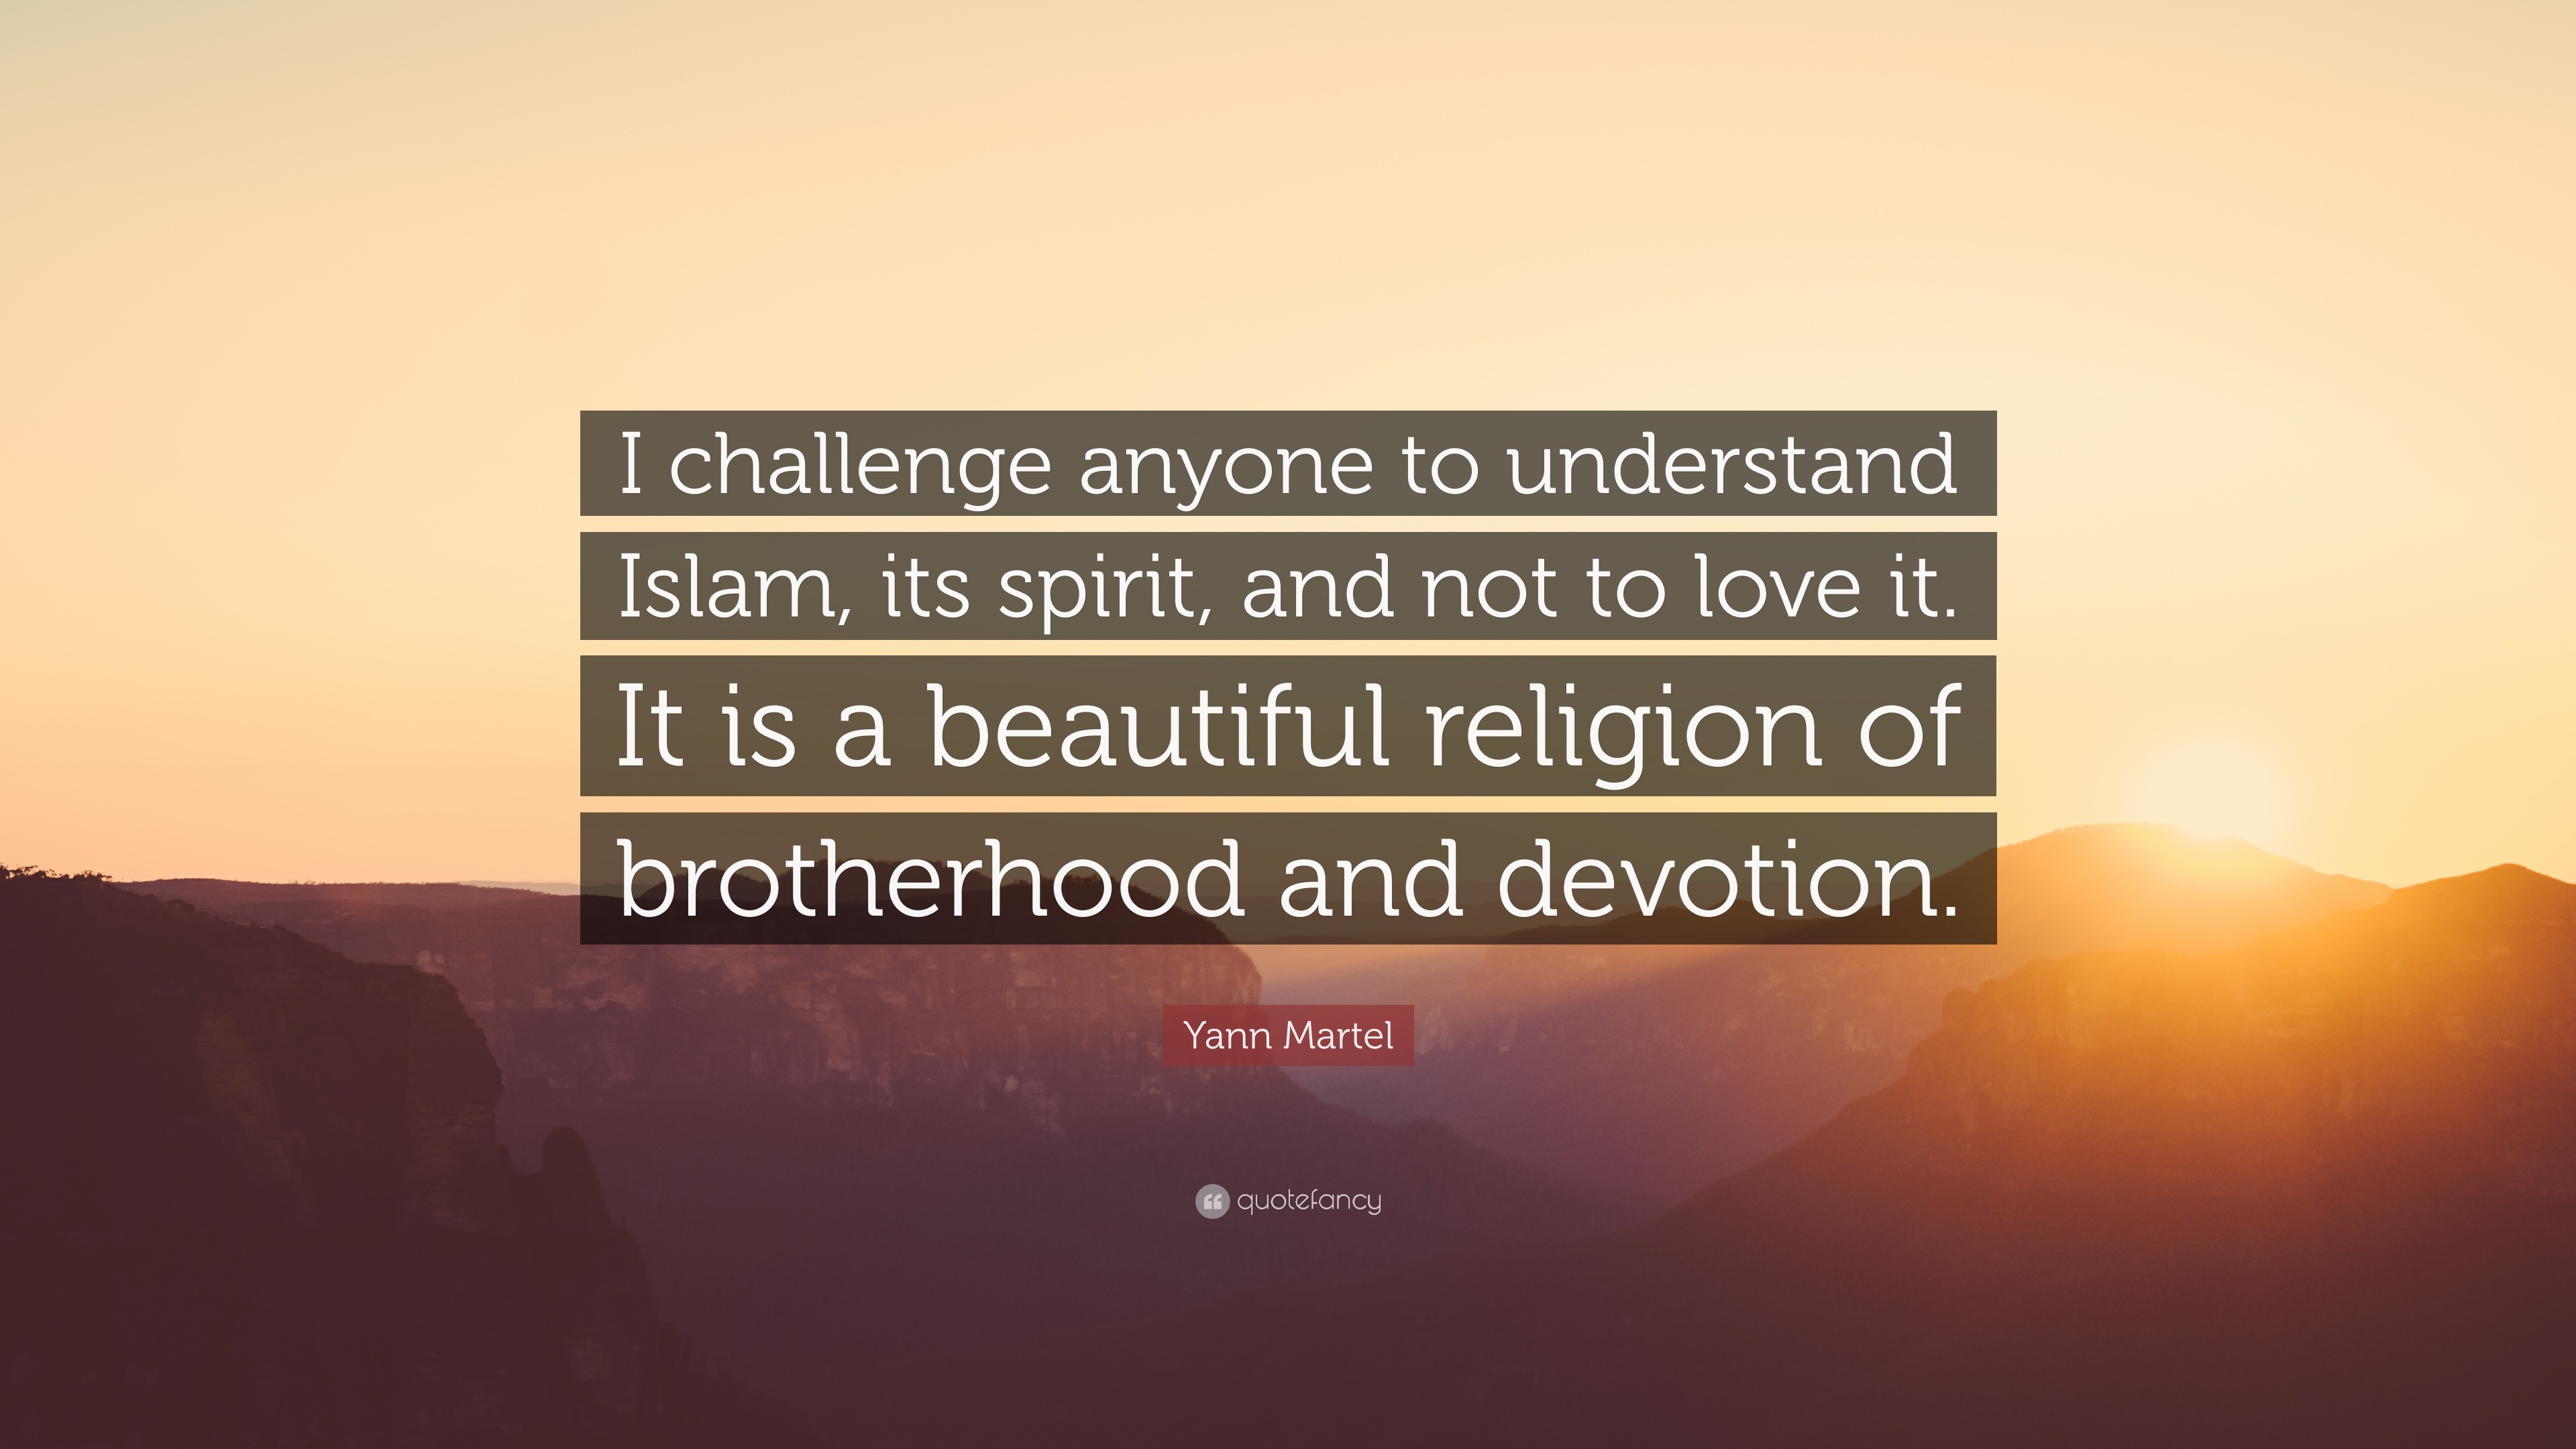 Yann Martel Quote “I challenge anyone to understand Islam its spirit and